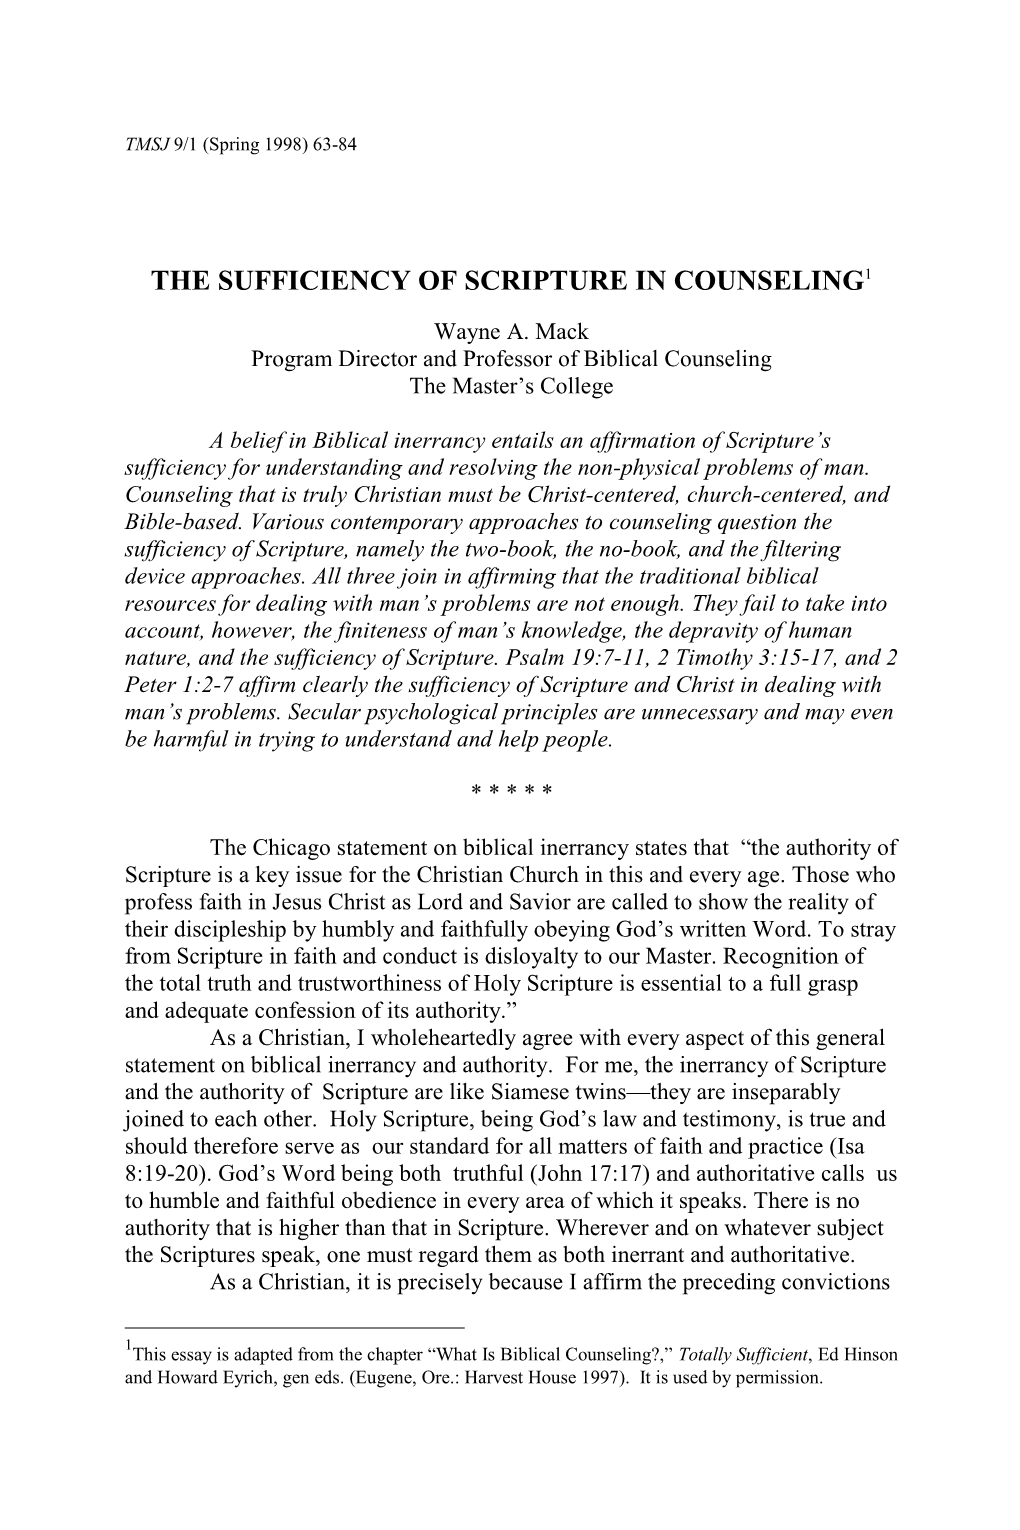 The Sufficiency of Scripture in Counseling1